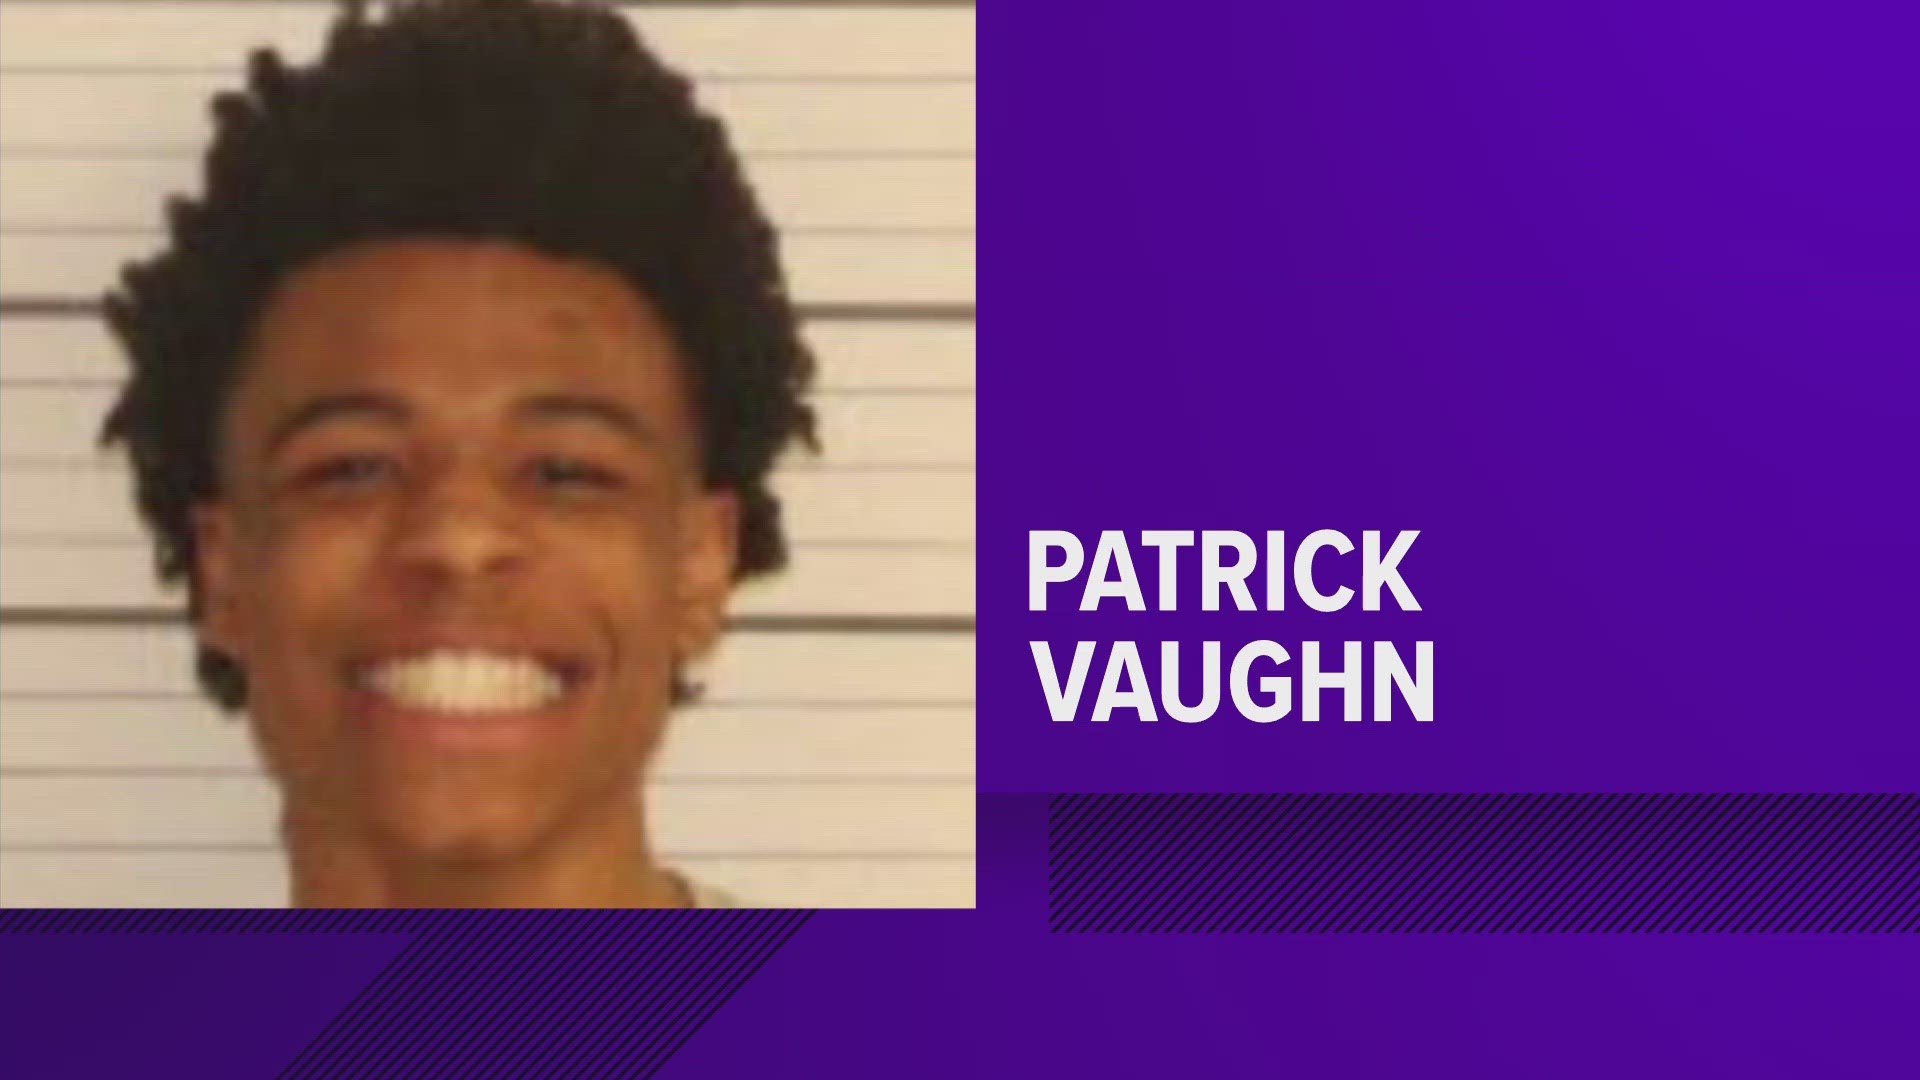 Patrick Vaughn, 18, is charged with several counts of aggravated assault, burglary of a vehicle, theft of property, and reckless endangerment.